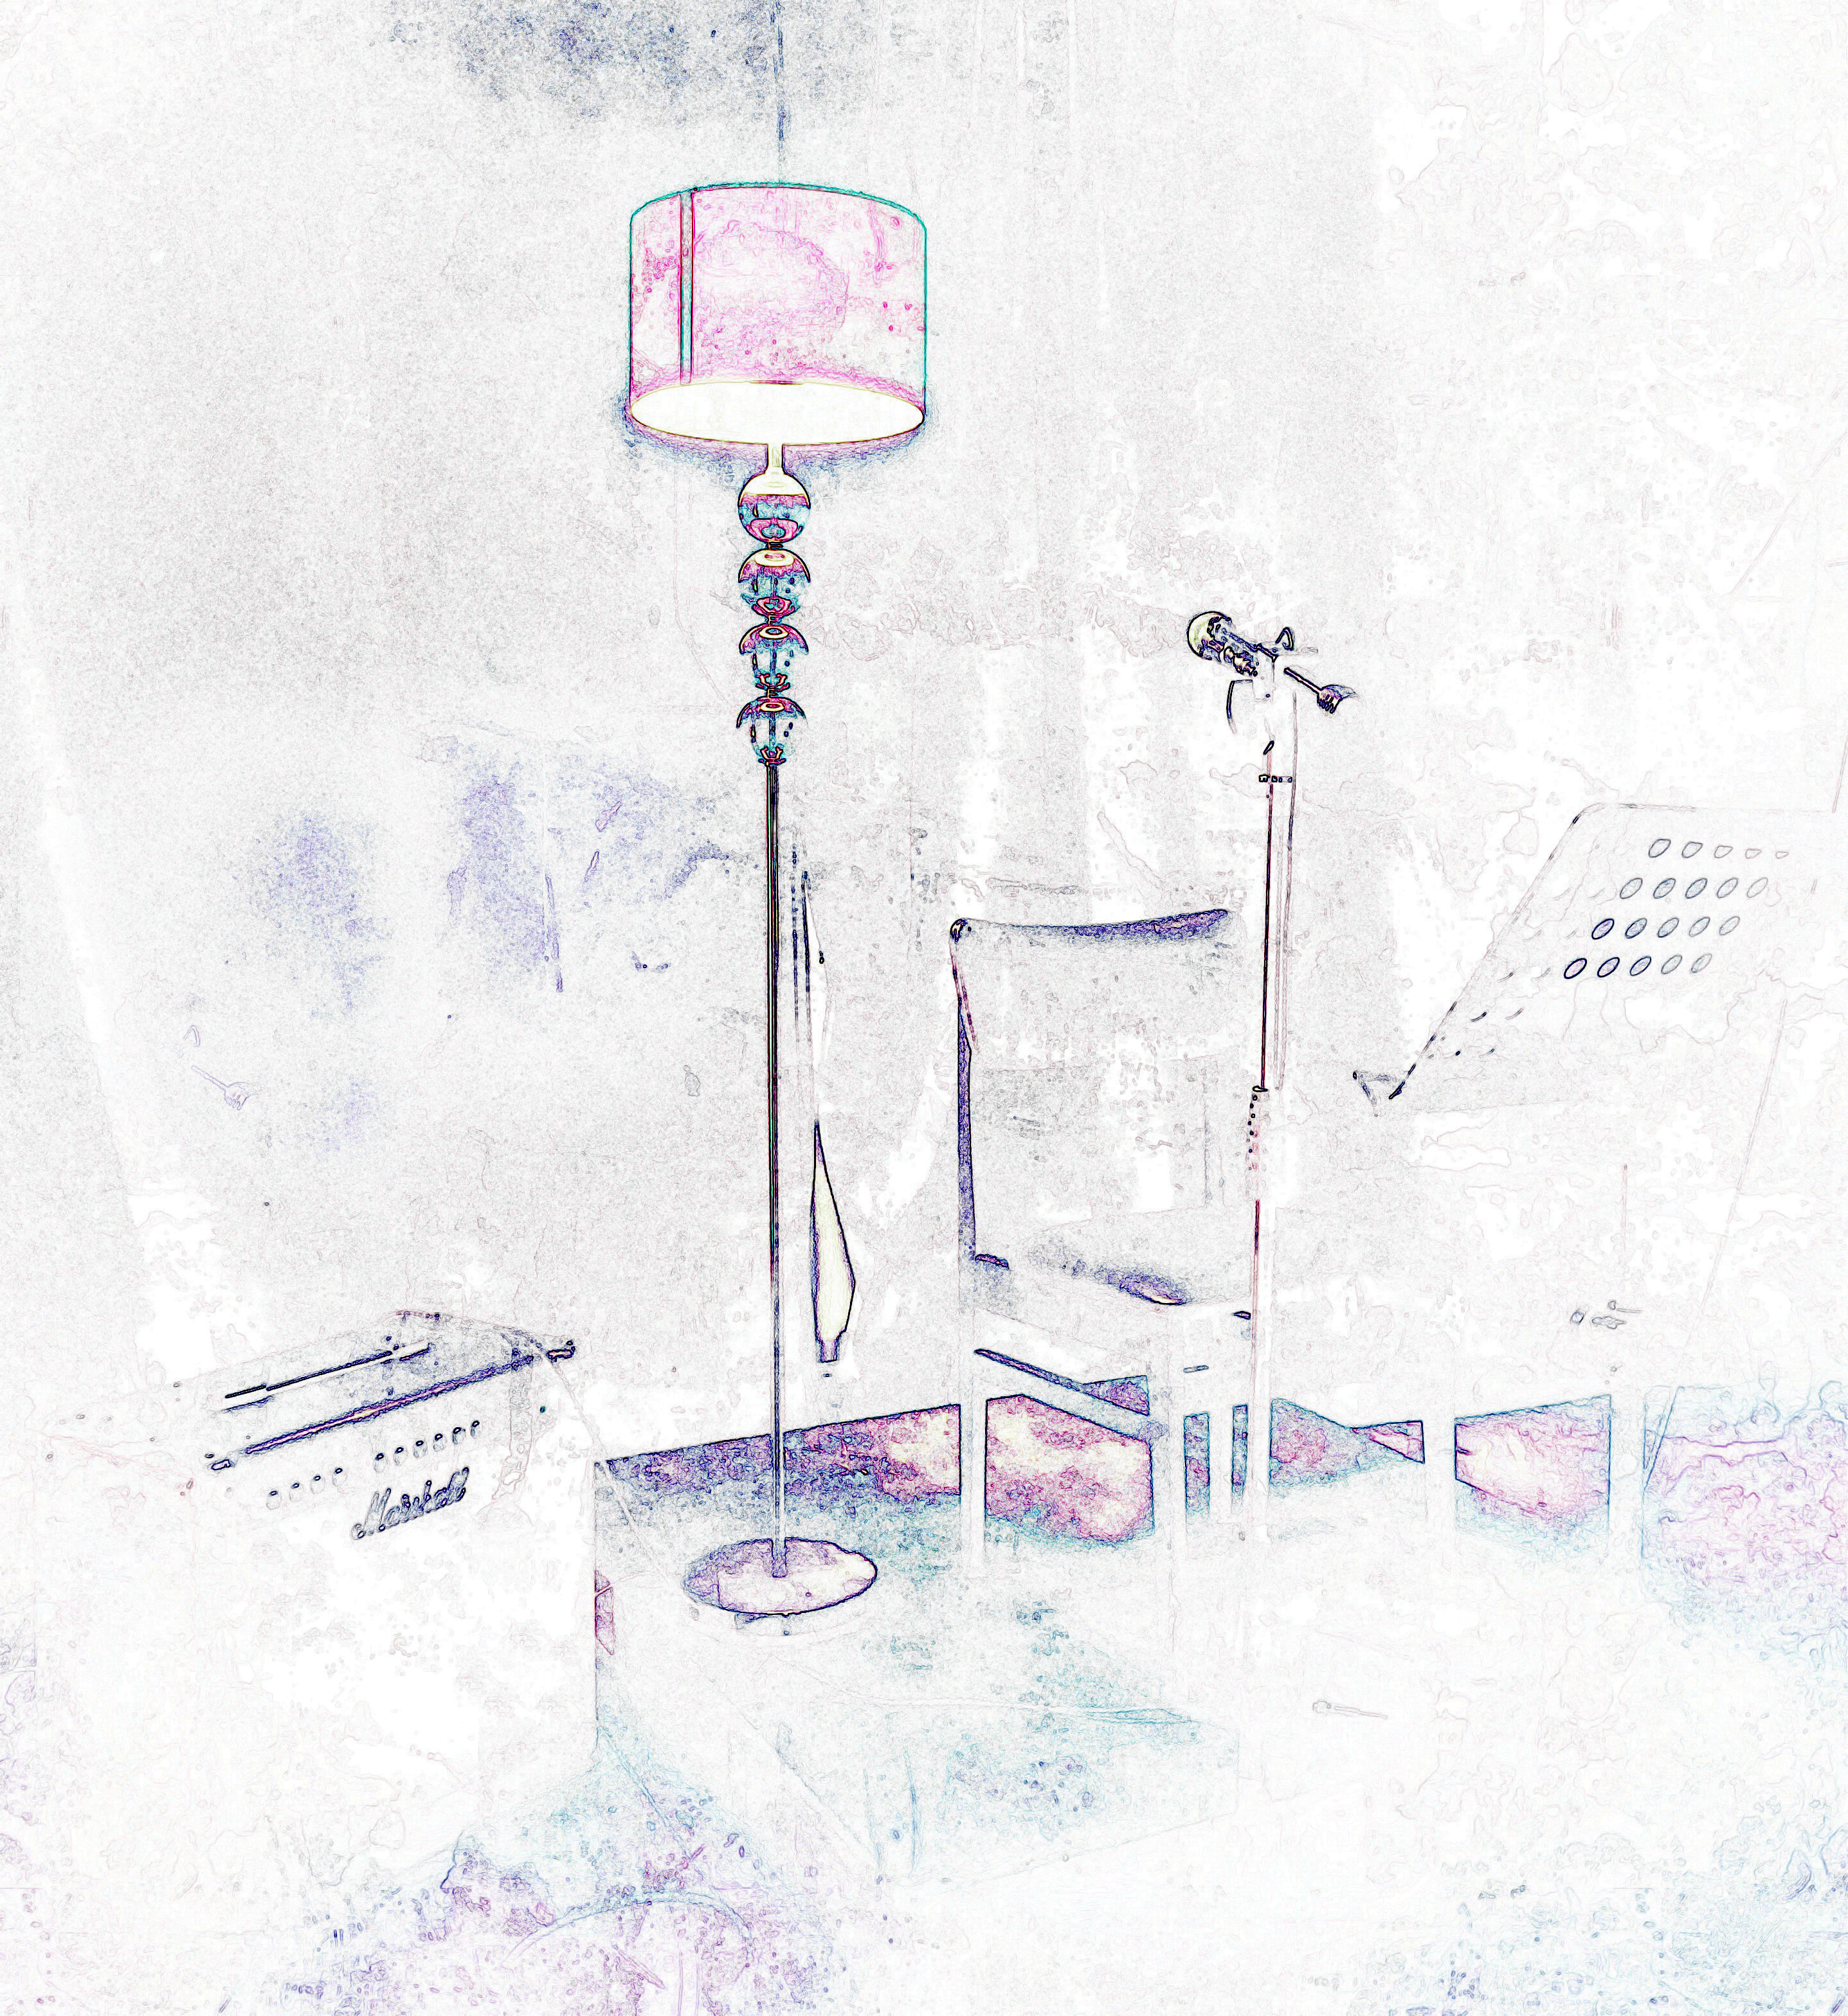 stylised image of stage with chair, amplifier, lampstand and microphone on stand